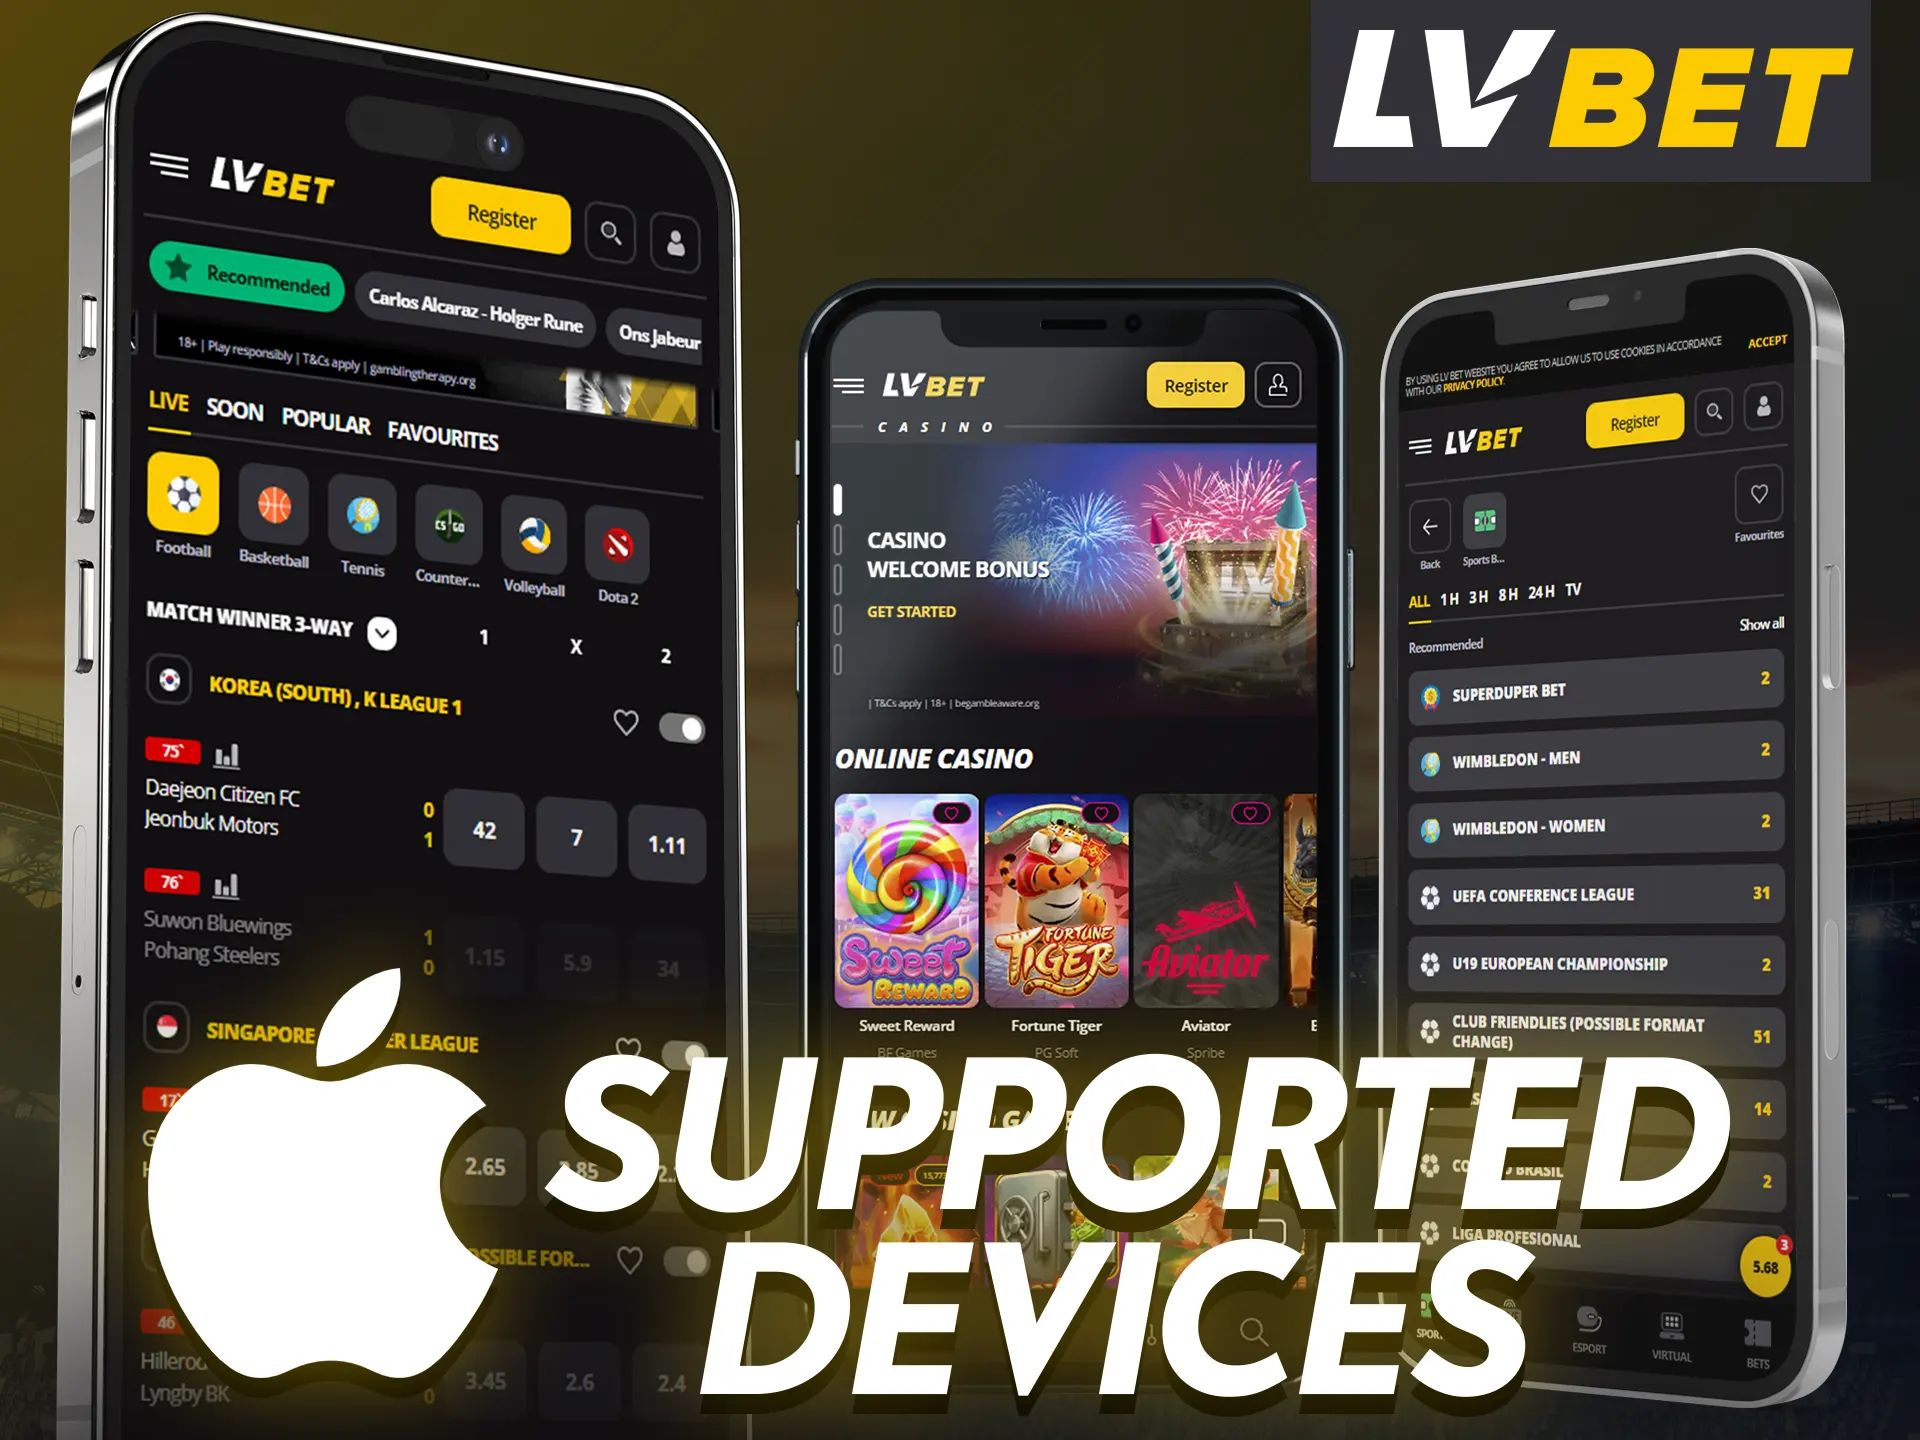 The LV Bet app can be installed on a variety of devices with the iOS system.